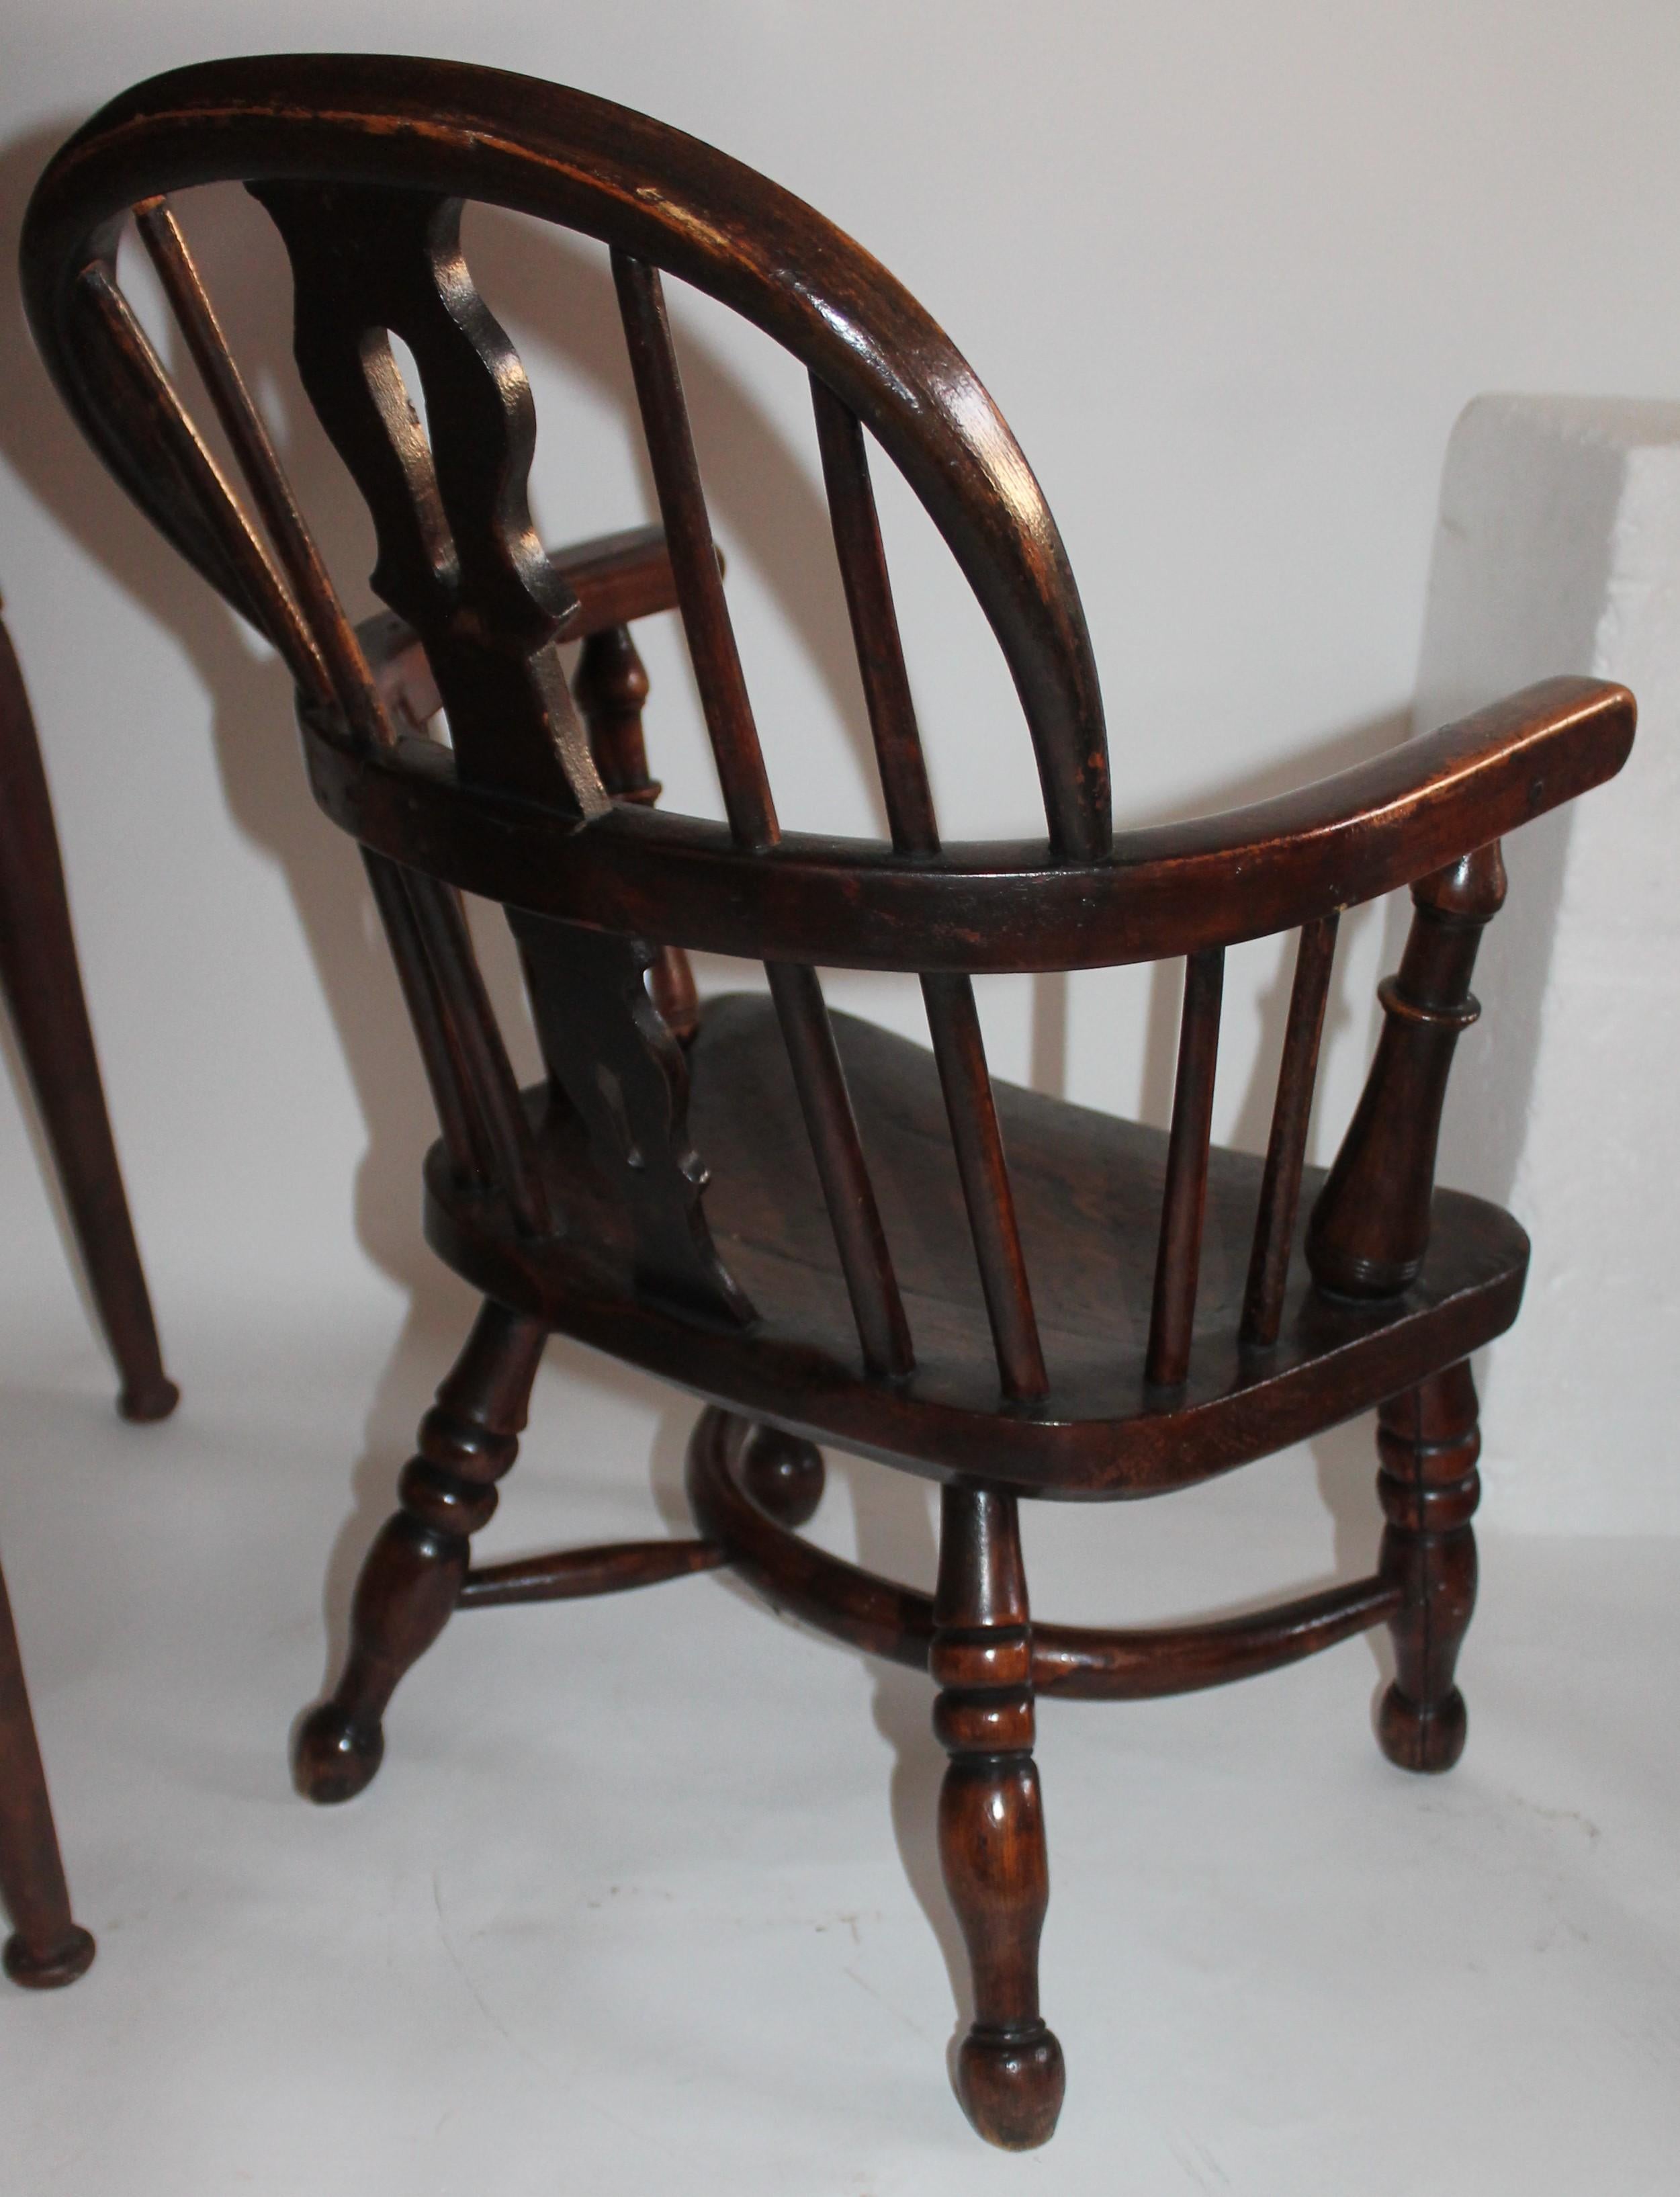 Country 19th Century Early English Windsor Child's Chair